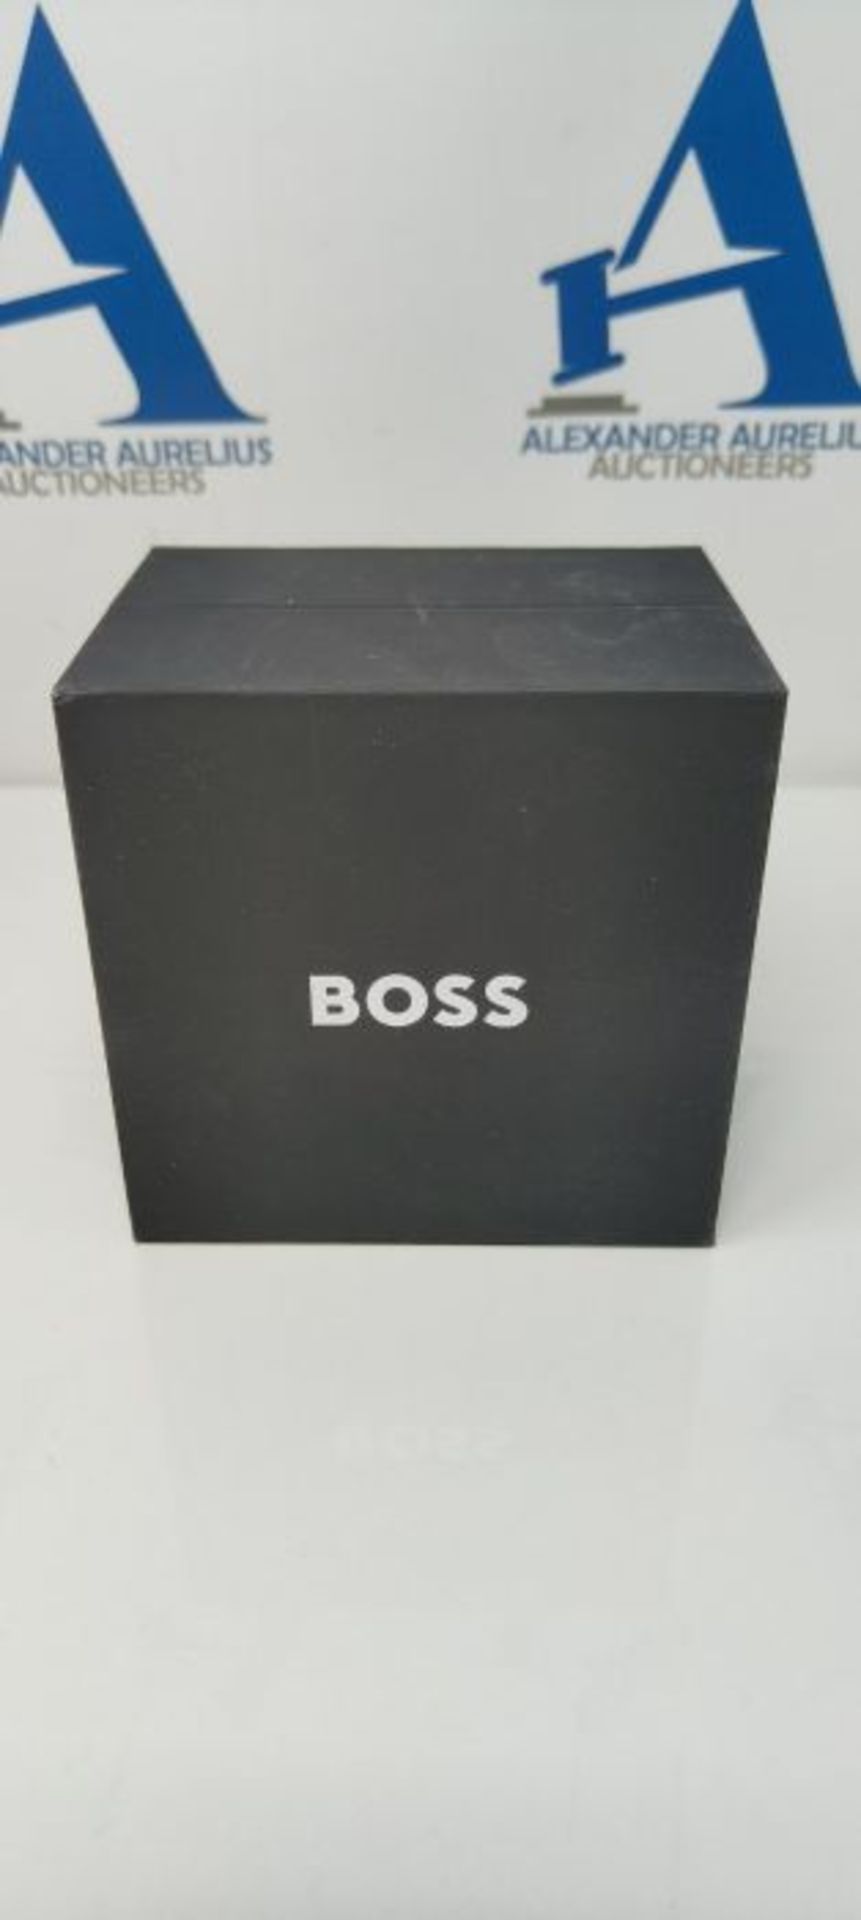 RRP £246.00 BOSS Men's Analogue Quartz Watch with Leather Calfskin Strap 1513816 - Image 2 of 3